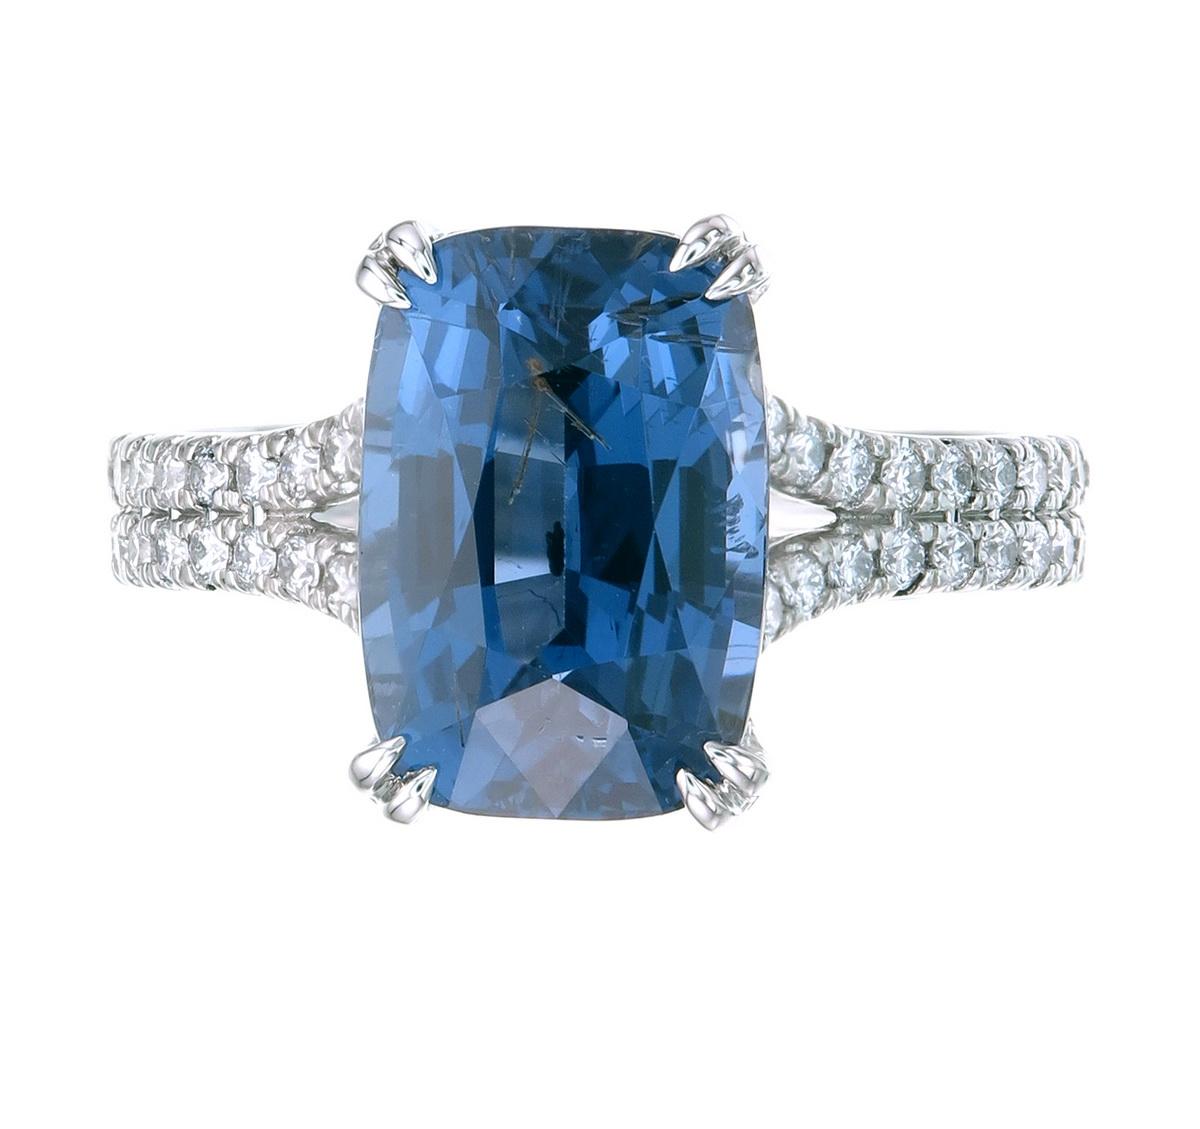 Orloff of Denmark's very own 'Neptunian Moonlight'
An extraordinary 5.10 carat blue spinel set in 950 platinum. The split-shank ring which the gem is set upon is adorned with wonderful VS1, brilliant diamonds spanning from the bottom of the band,